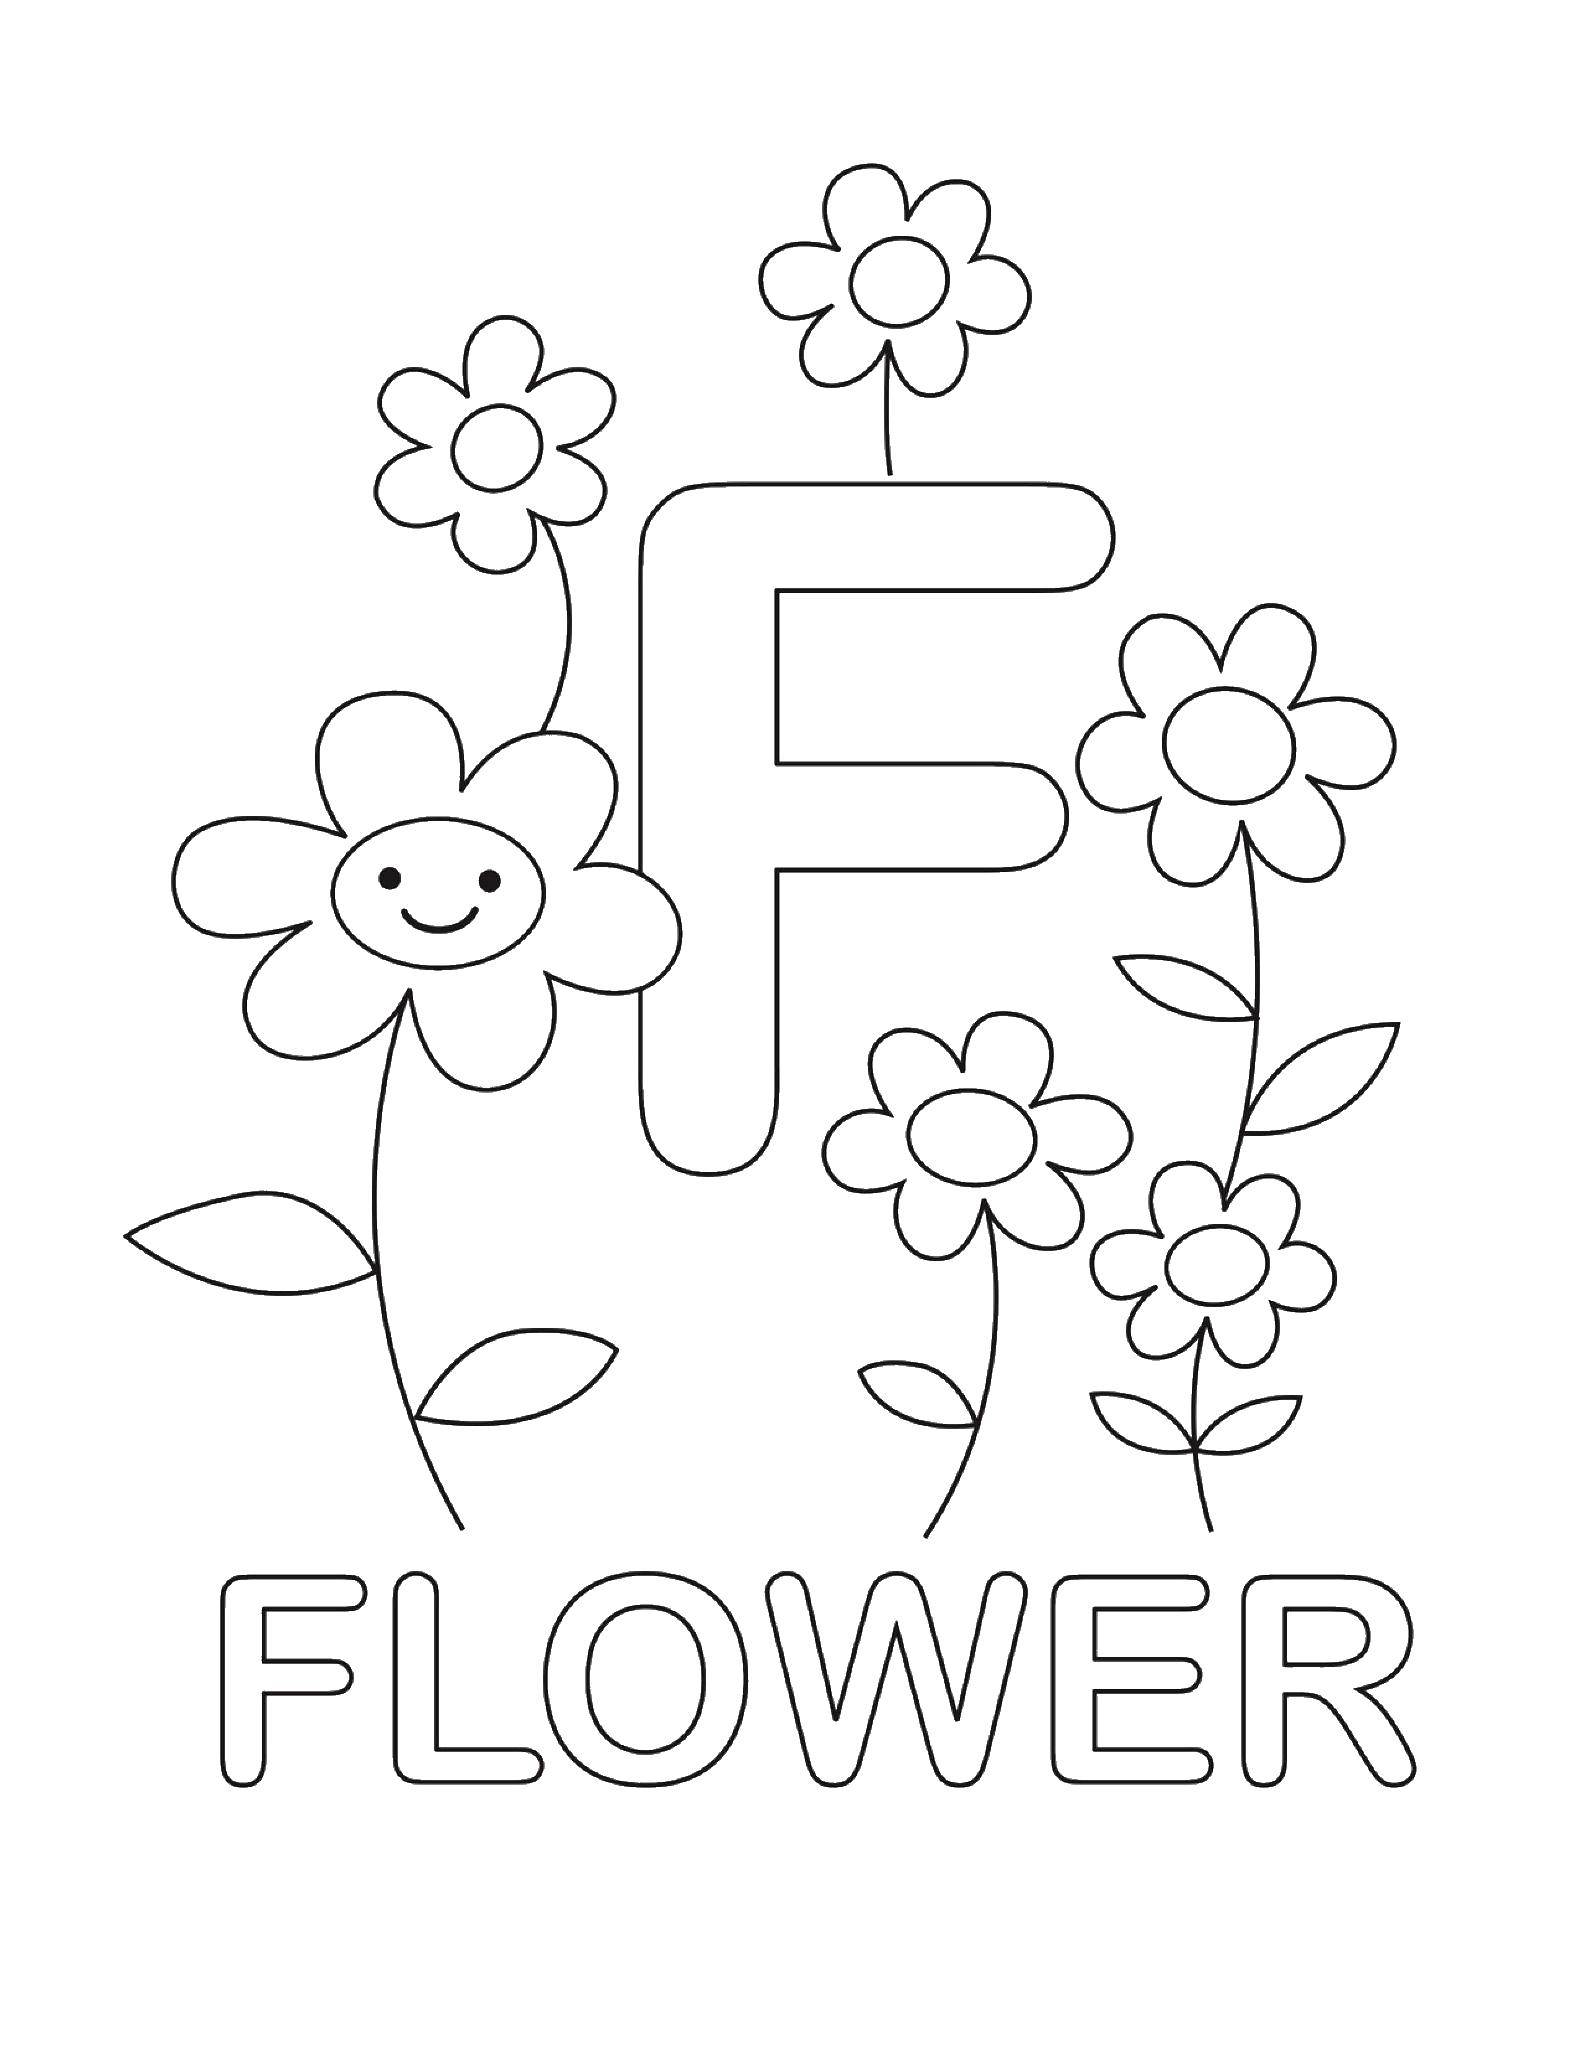 Coloring TS flower. Category English words. Tags:  English.